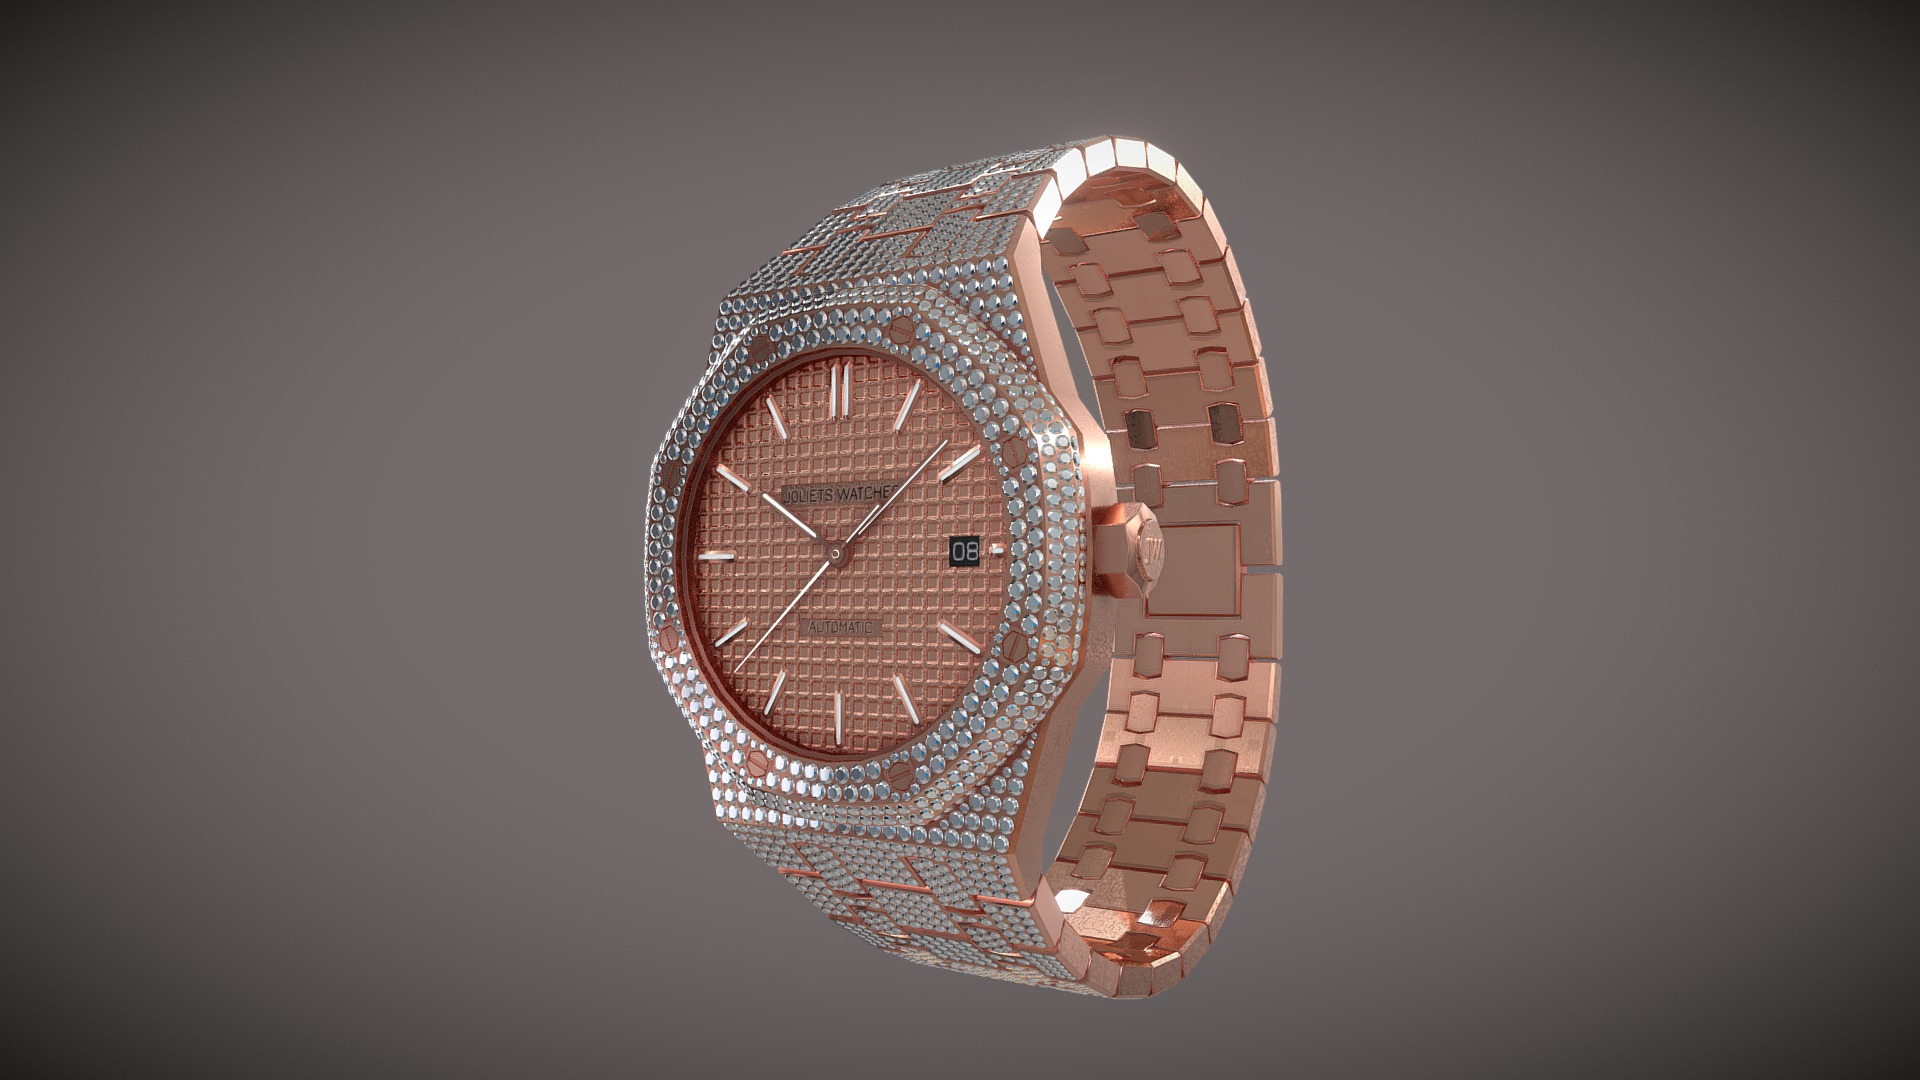 JW Watch - 3D model by AndyBegg 3d model